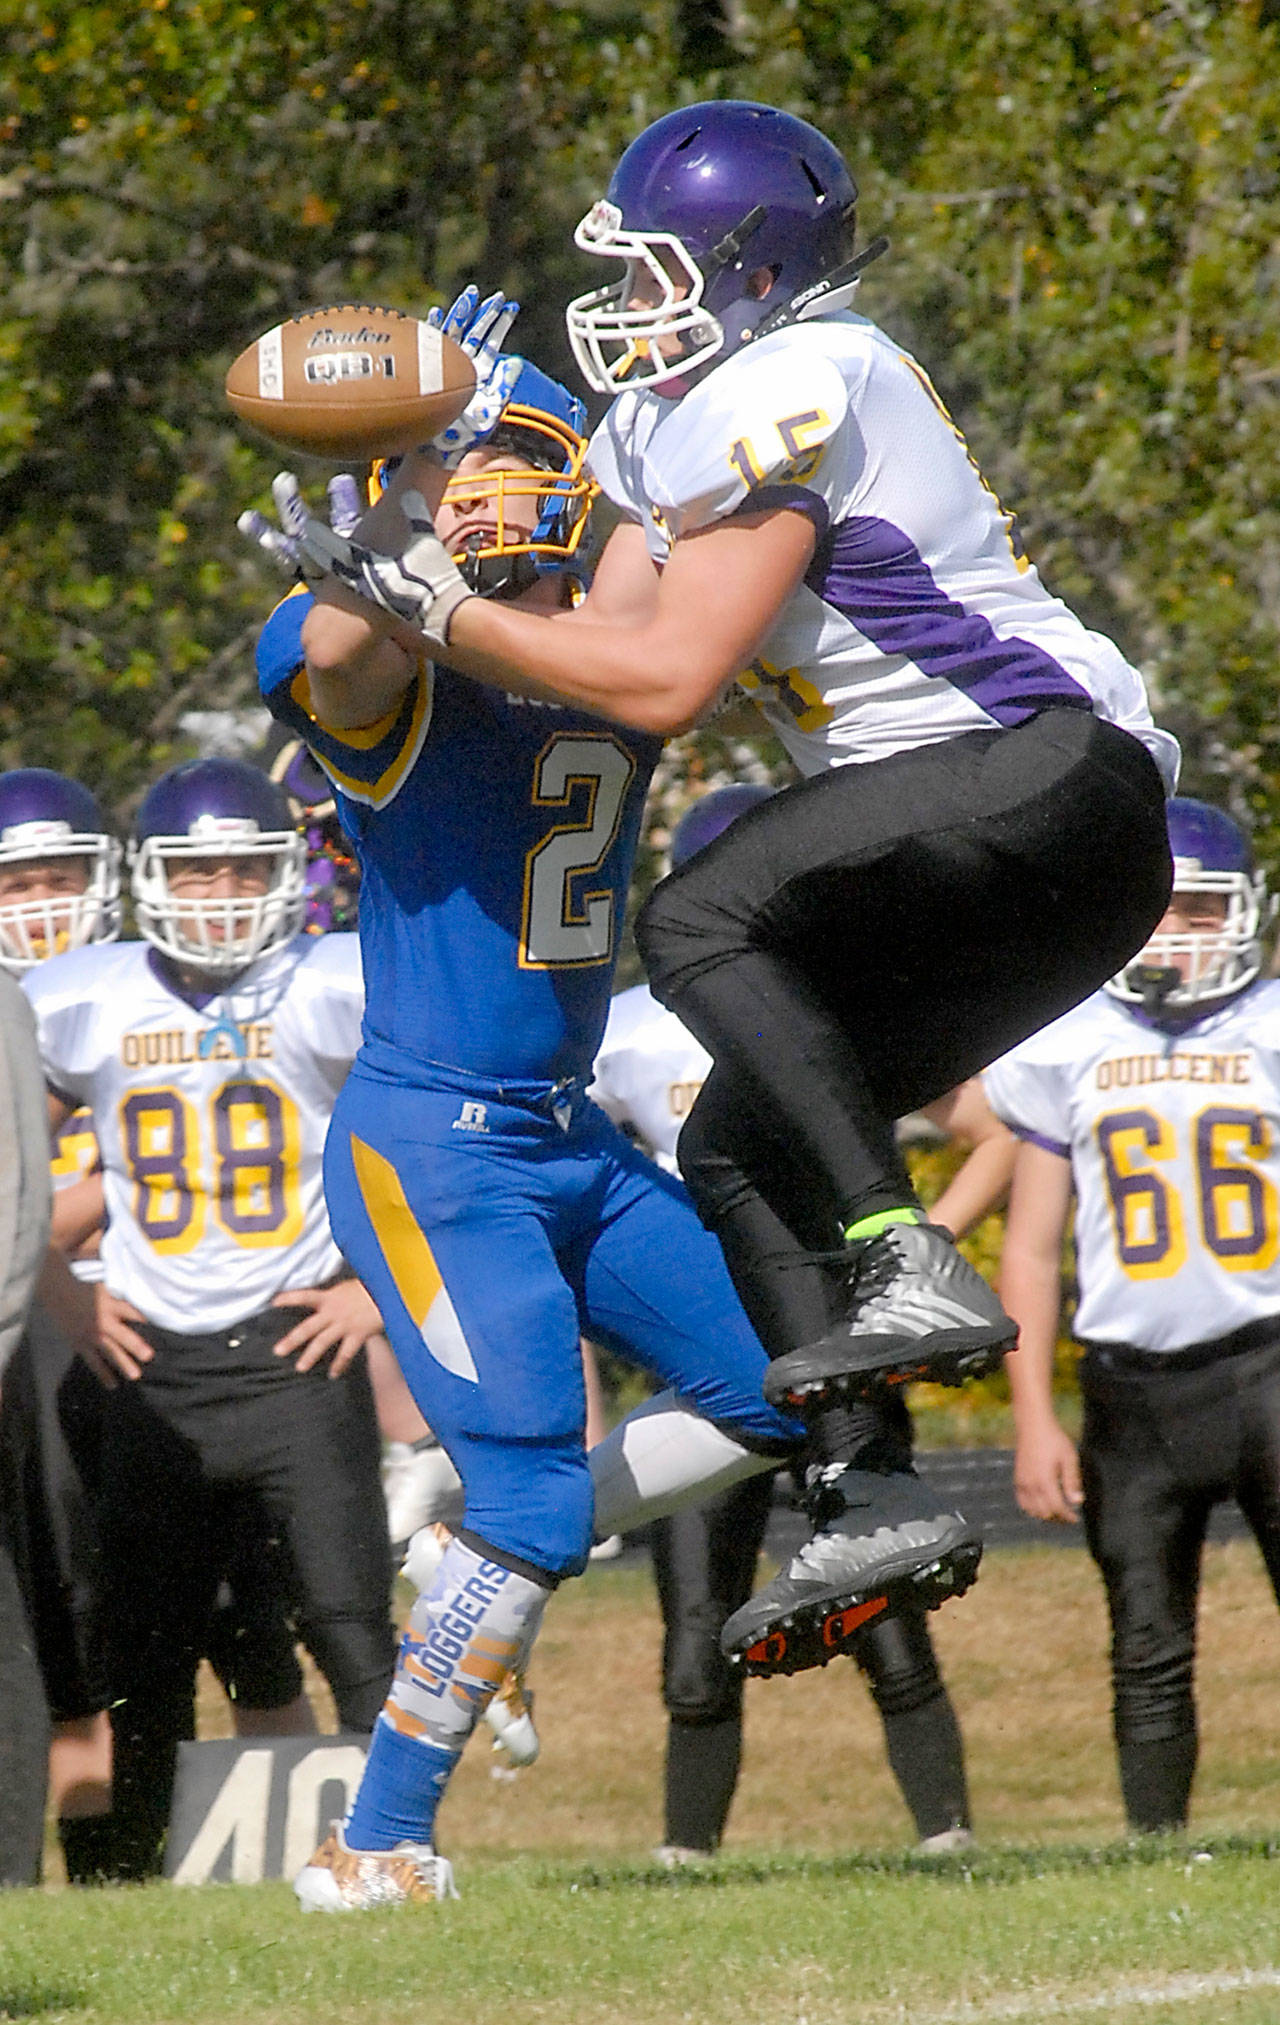 Keith Thorpe/Peninsula Daily News Crescent’s Robert Cox, left, breaks up the pass to Quilcene’s Eli Mahan in the first quarter of Saturday’s game in Joyce.                                 Crescent’s Robert Cox, left, breaks up the pass to Quilcene’s Eli Mahan in the firstquarter of Saturday’s game in Joyce. (Keith Thorpe/Peninsula Daily News)